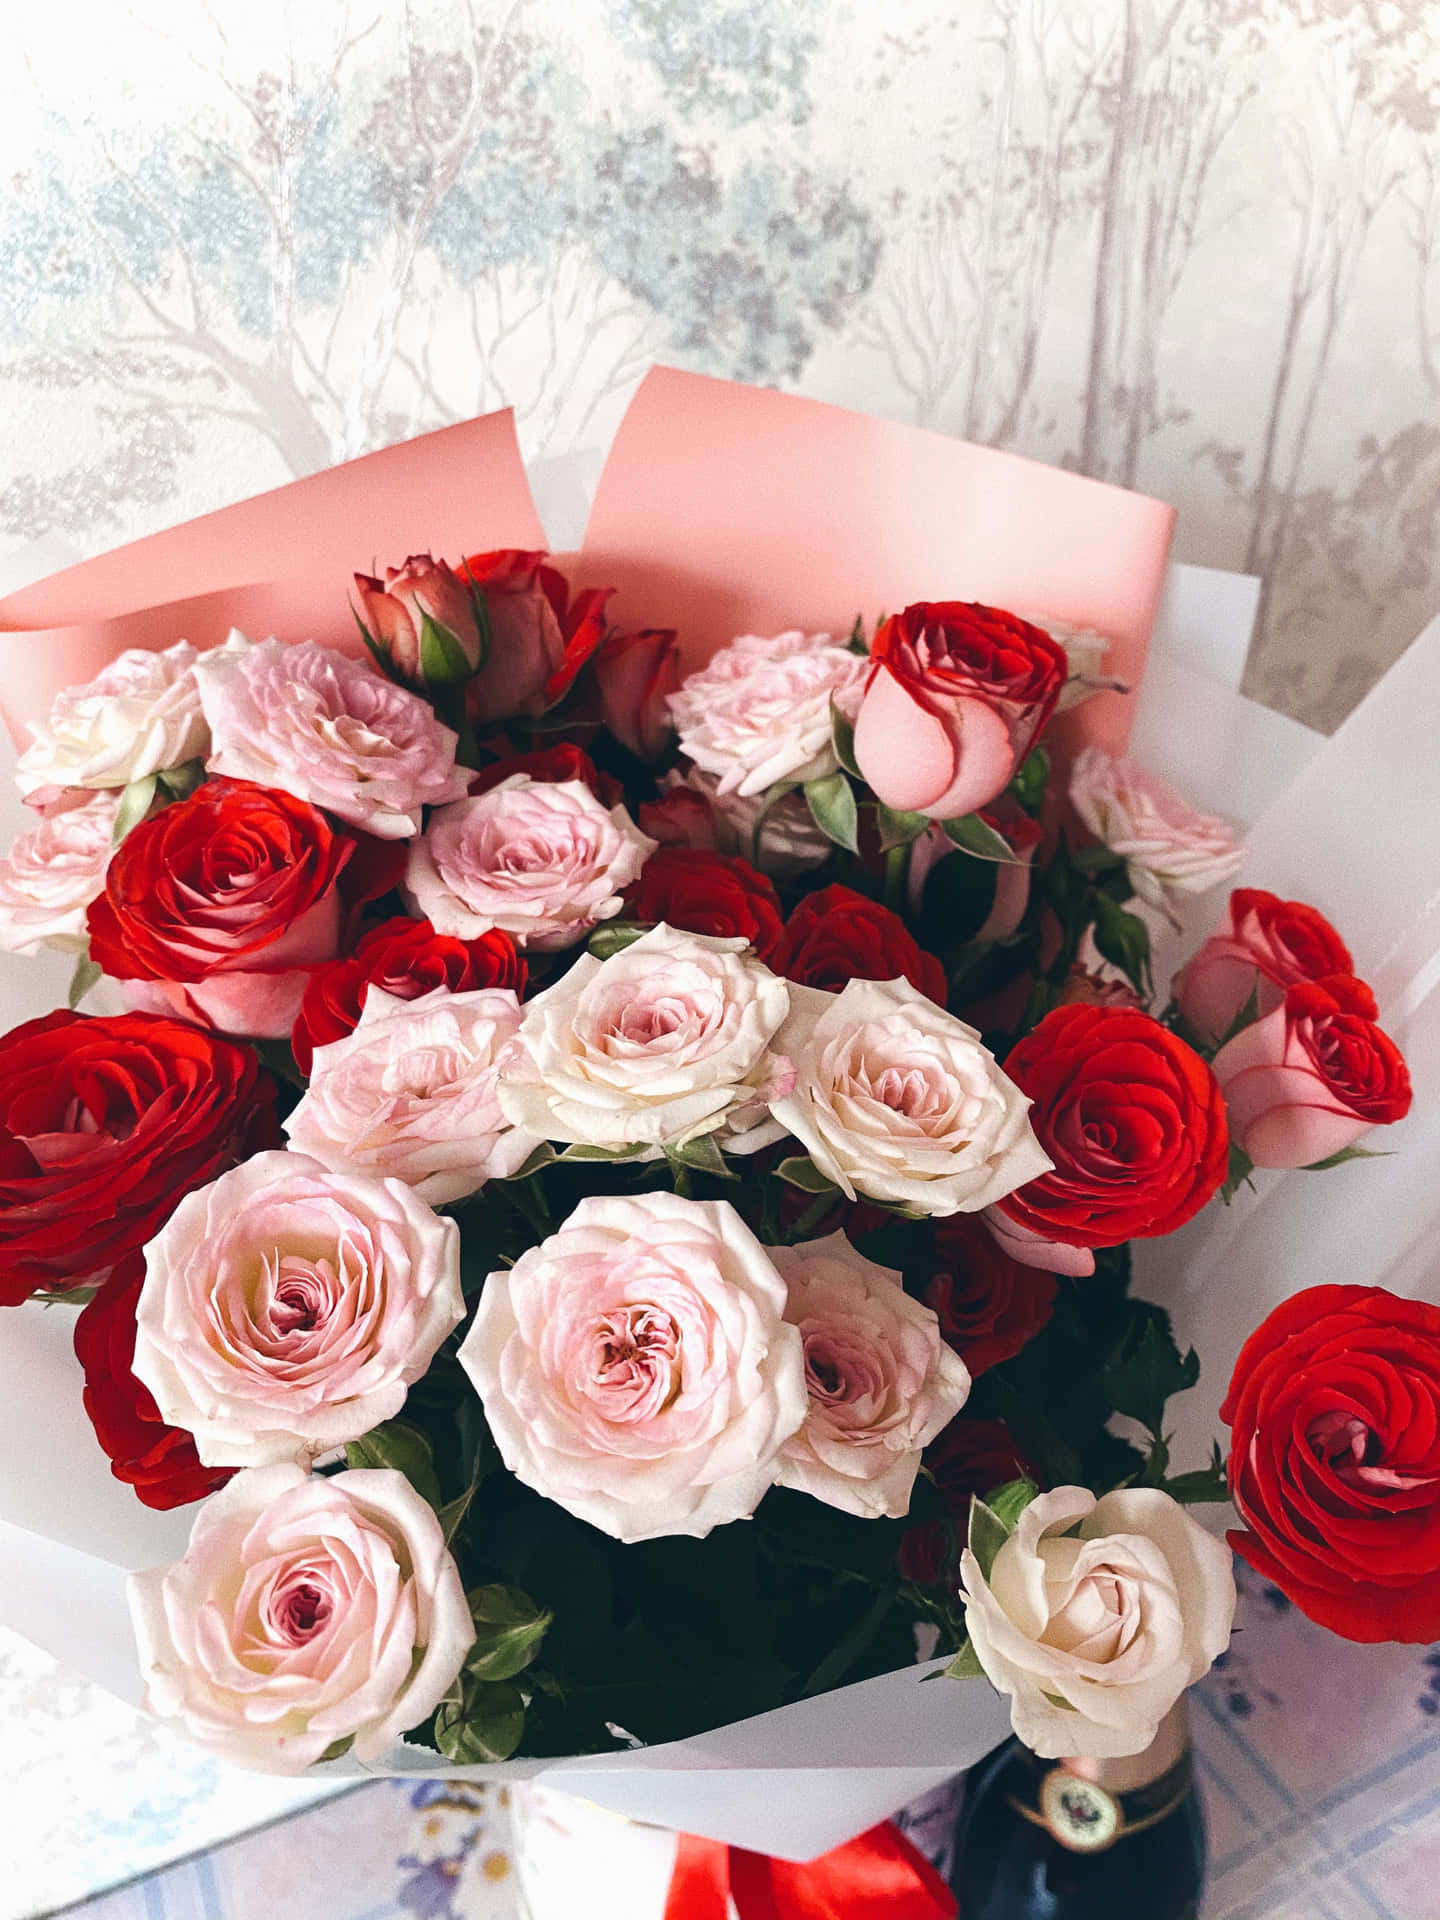 An Alluring Arrangement of Red Roses